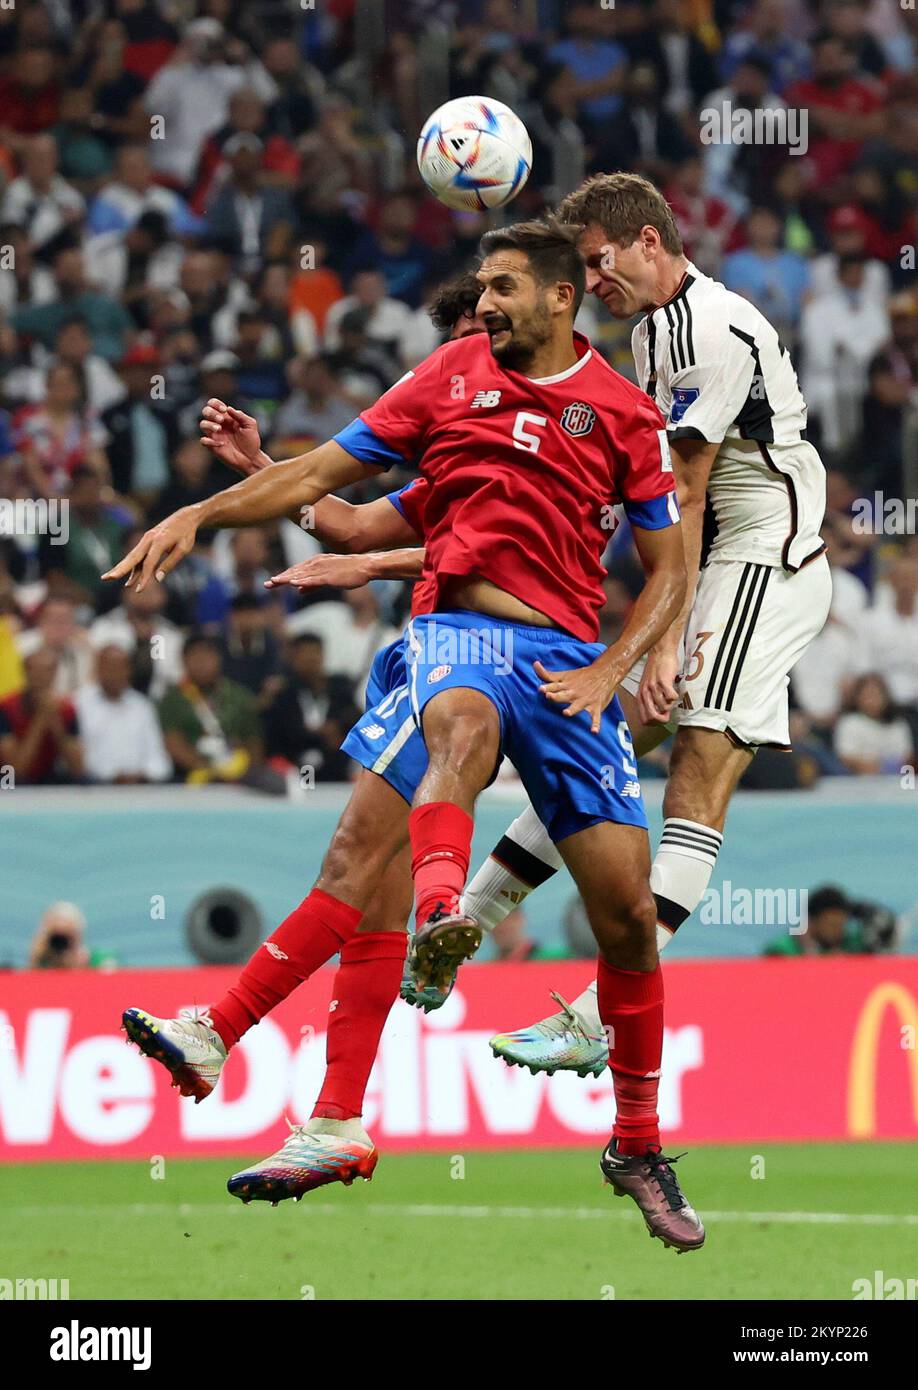 Al Khor, Qatar. 1st Dec, 2022. Celso Borges (L) of Costa Rica vies with Thomas Mueller of Germany during the Group E match between Costa Rica and Germany at the 2022 FIFA World Cup at Al Bayt Stadium in Al Khor, Qatar, Dec. 1, 2022. Credit: Han Yan/Xinhua/Alamy Live News Stock Photo